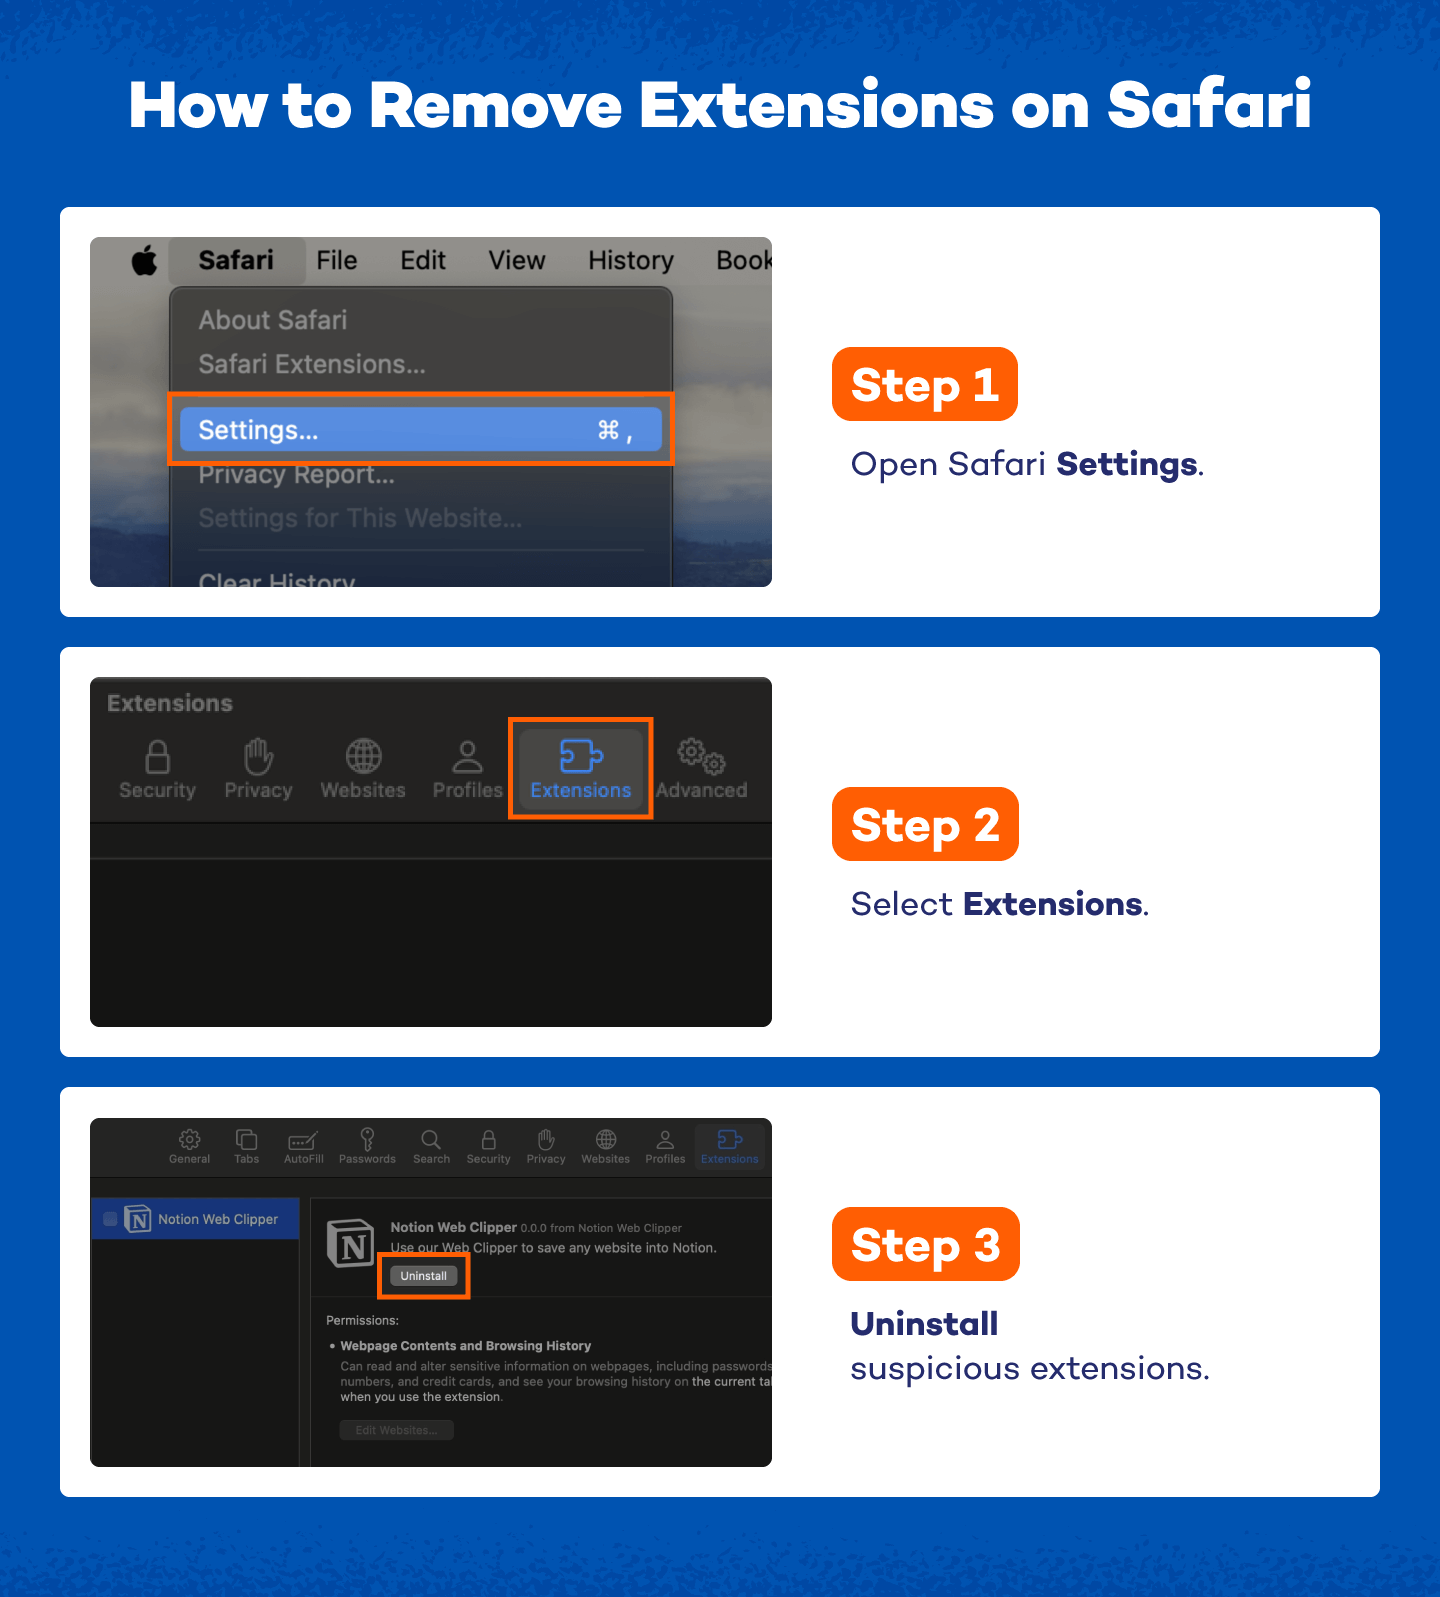 steps showing how to remove extensions on Safari